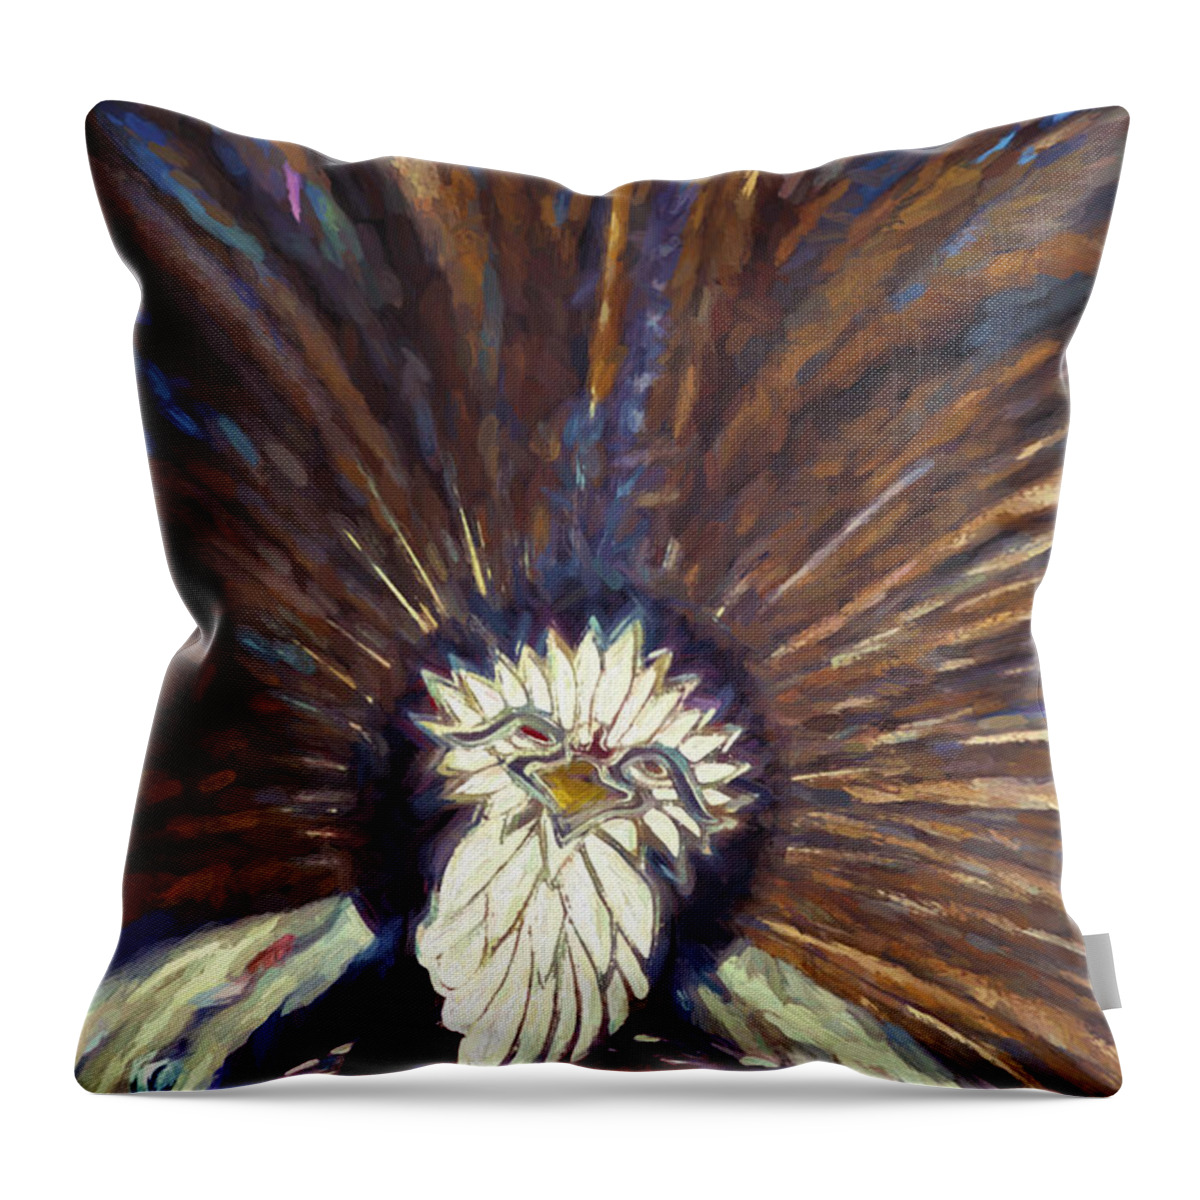 Aztec Throw Pillow featuring the photograph Aztec #2 by Paul W Faust - Impressions of Light